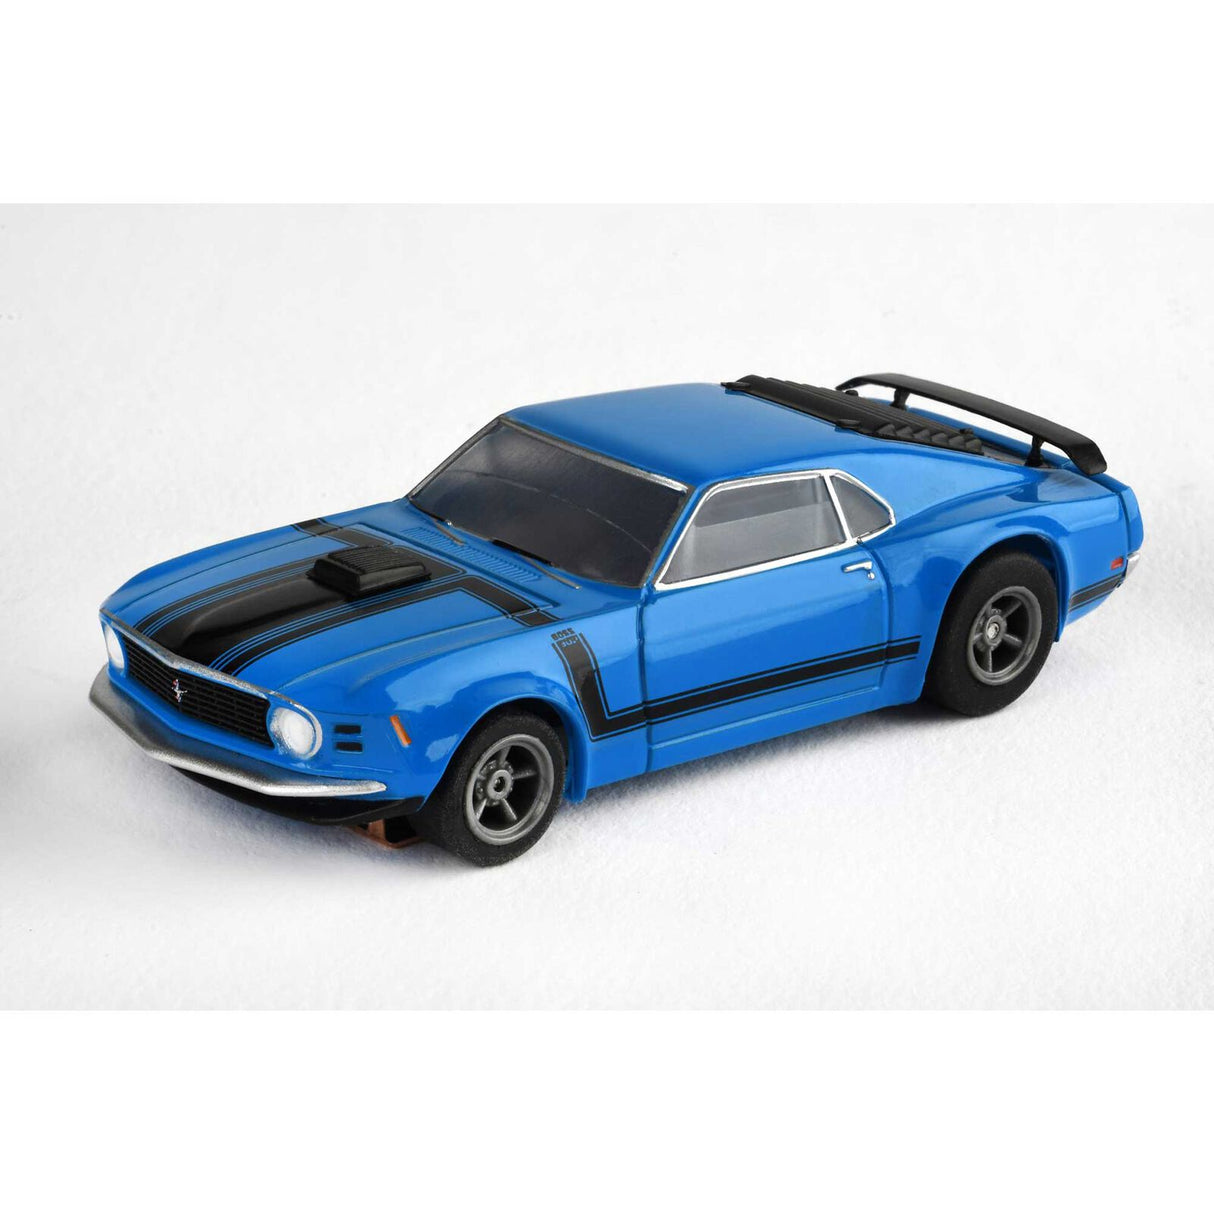 Detailed blue sports car model with black accents and racing features, showcased on a plain background.